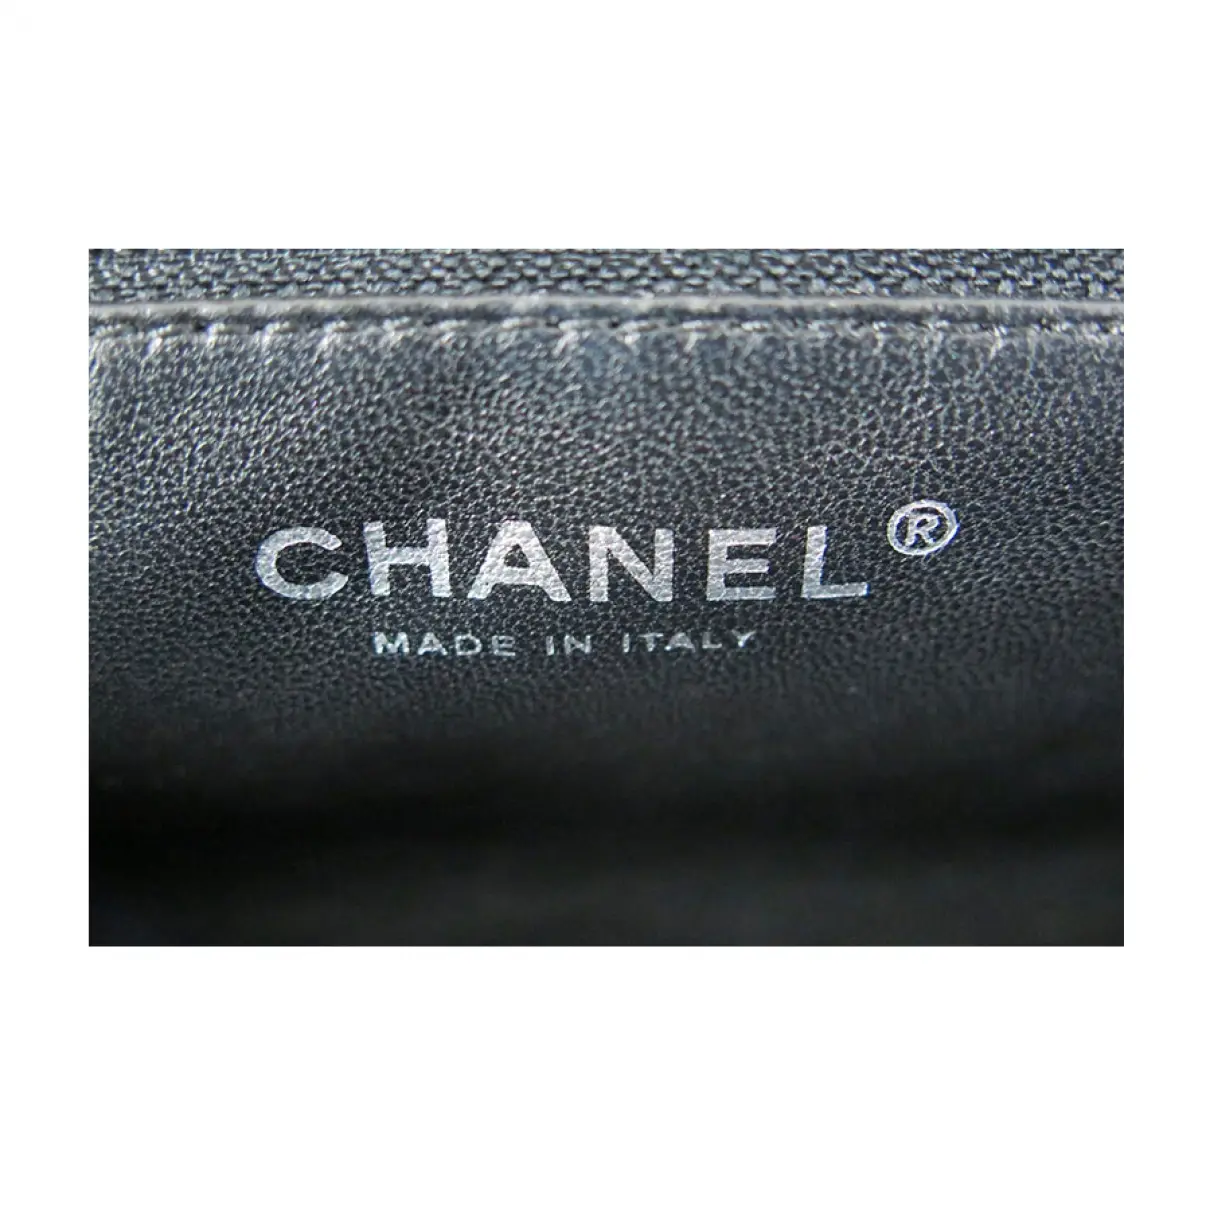 Buy Chanel Mademoiselle patent leather clutch bag online